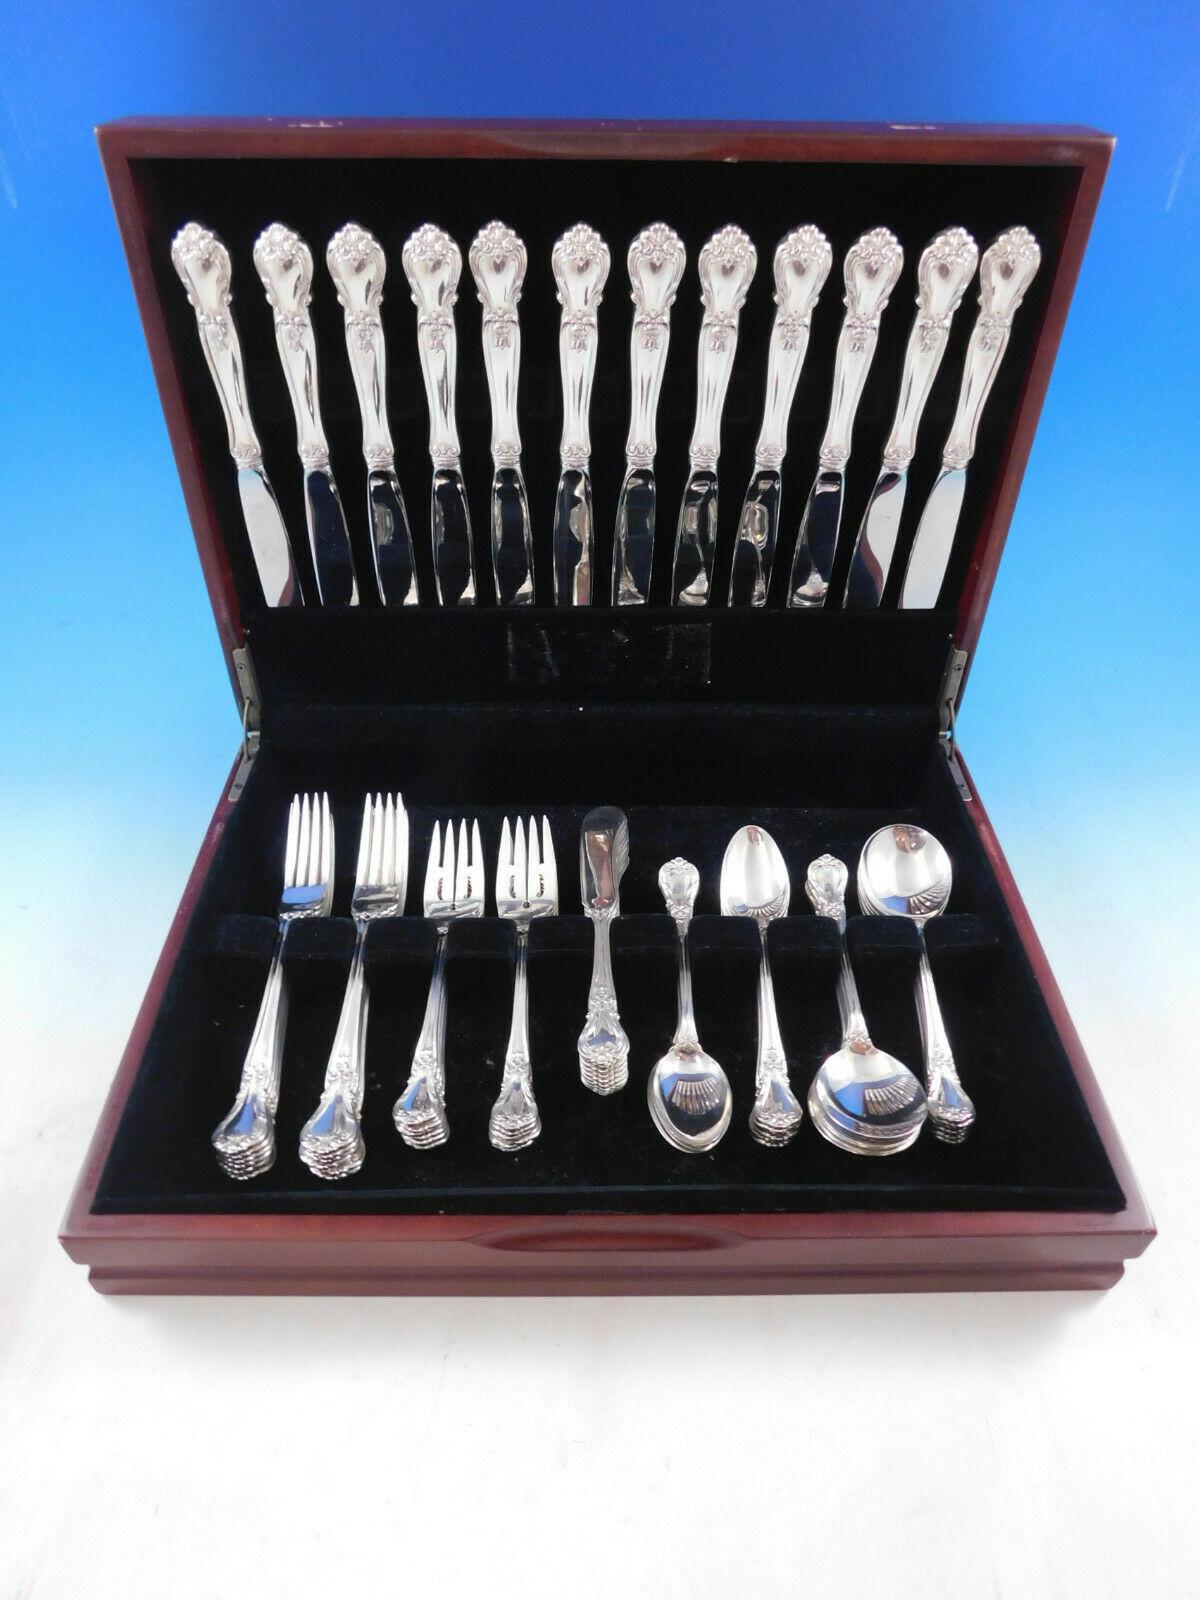 Ancestry by Weidlich sterling silver flatware set, 72 pieces. This set includes:

12 knives, 9